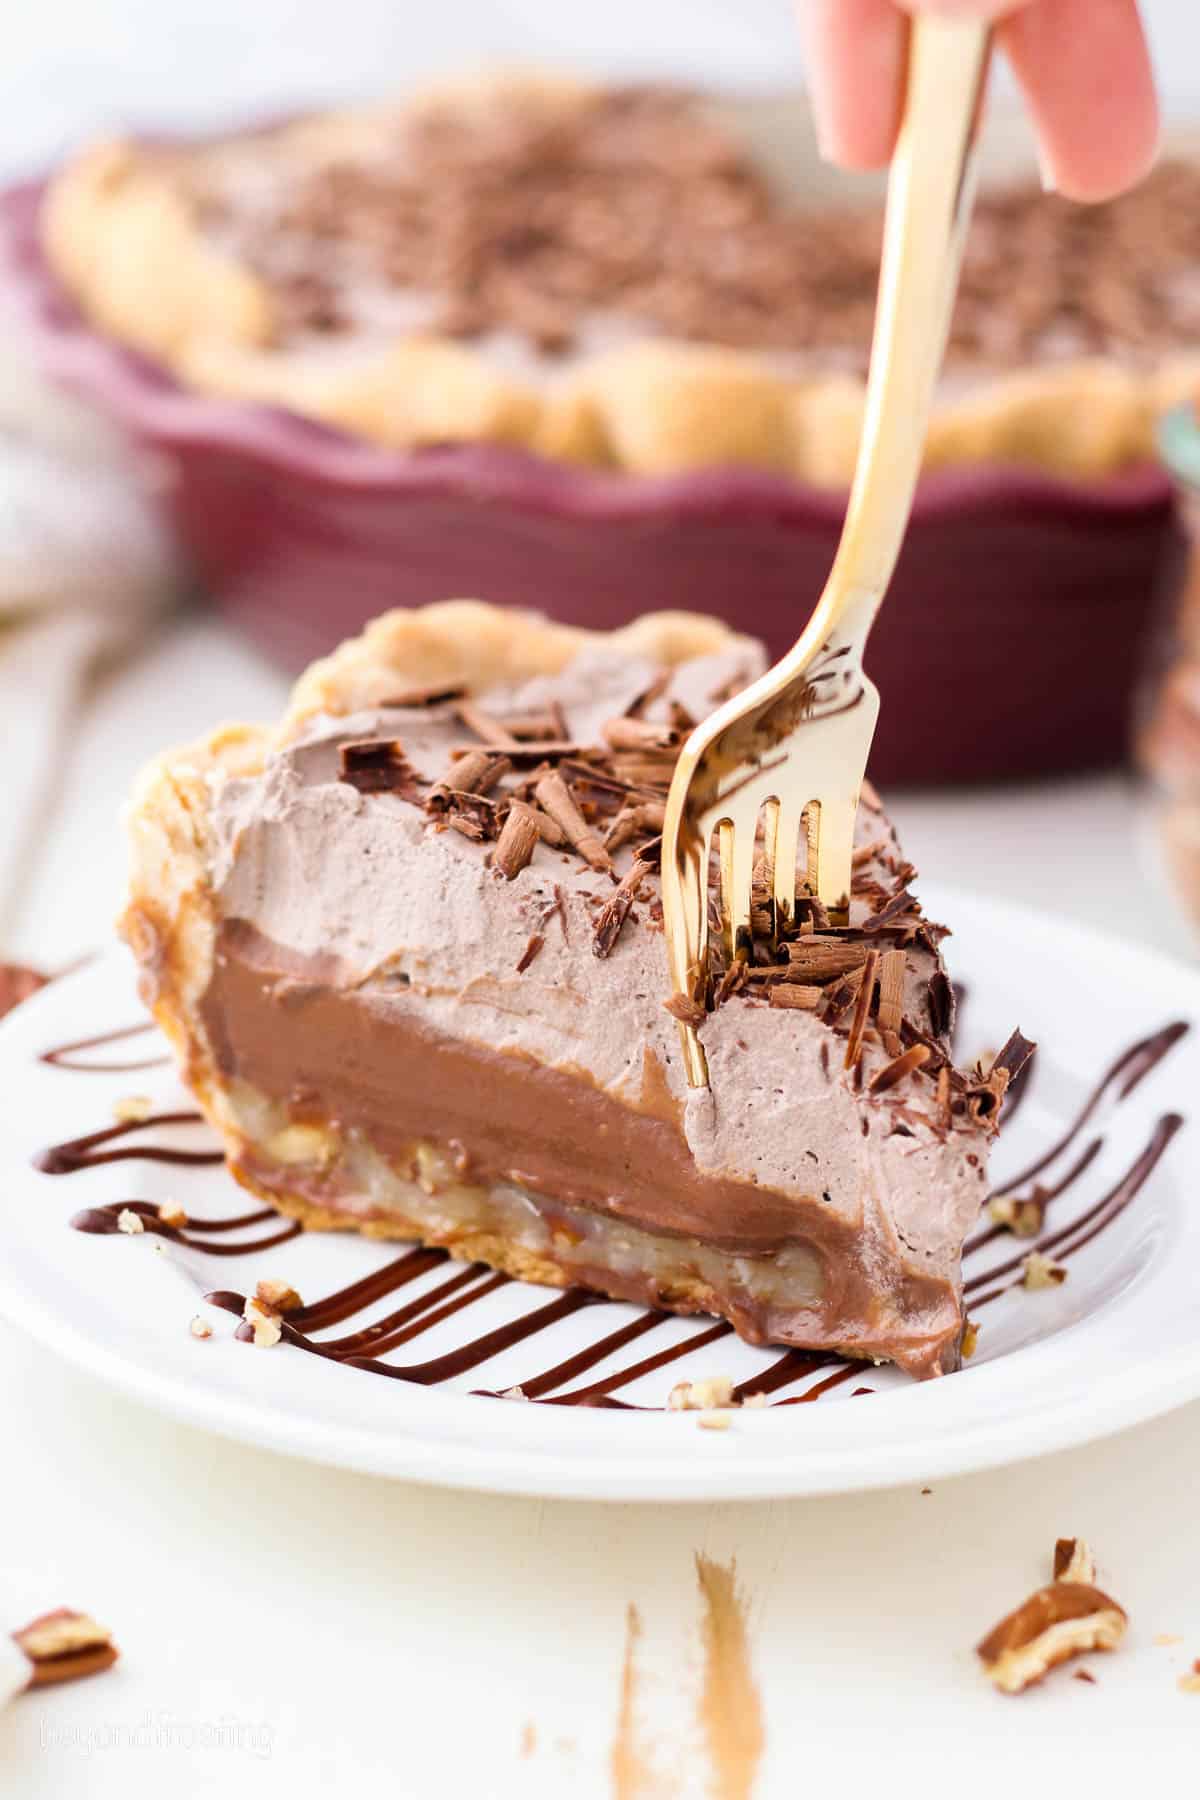 A fork stuck into the tip of a slice of German chocolate pie on a white plate drizzled with chocolate sauce, with the rest of the pie in a pie plate in the background.